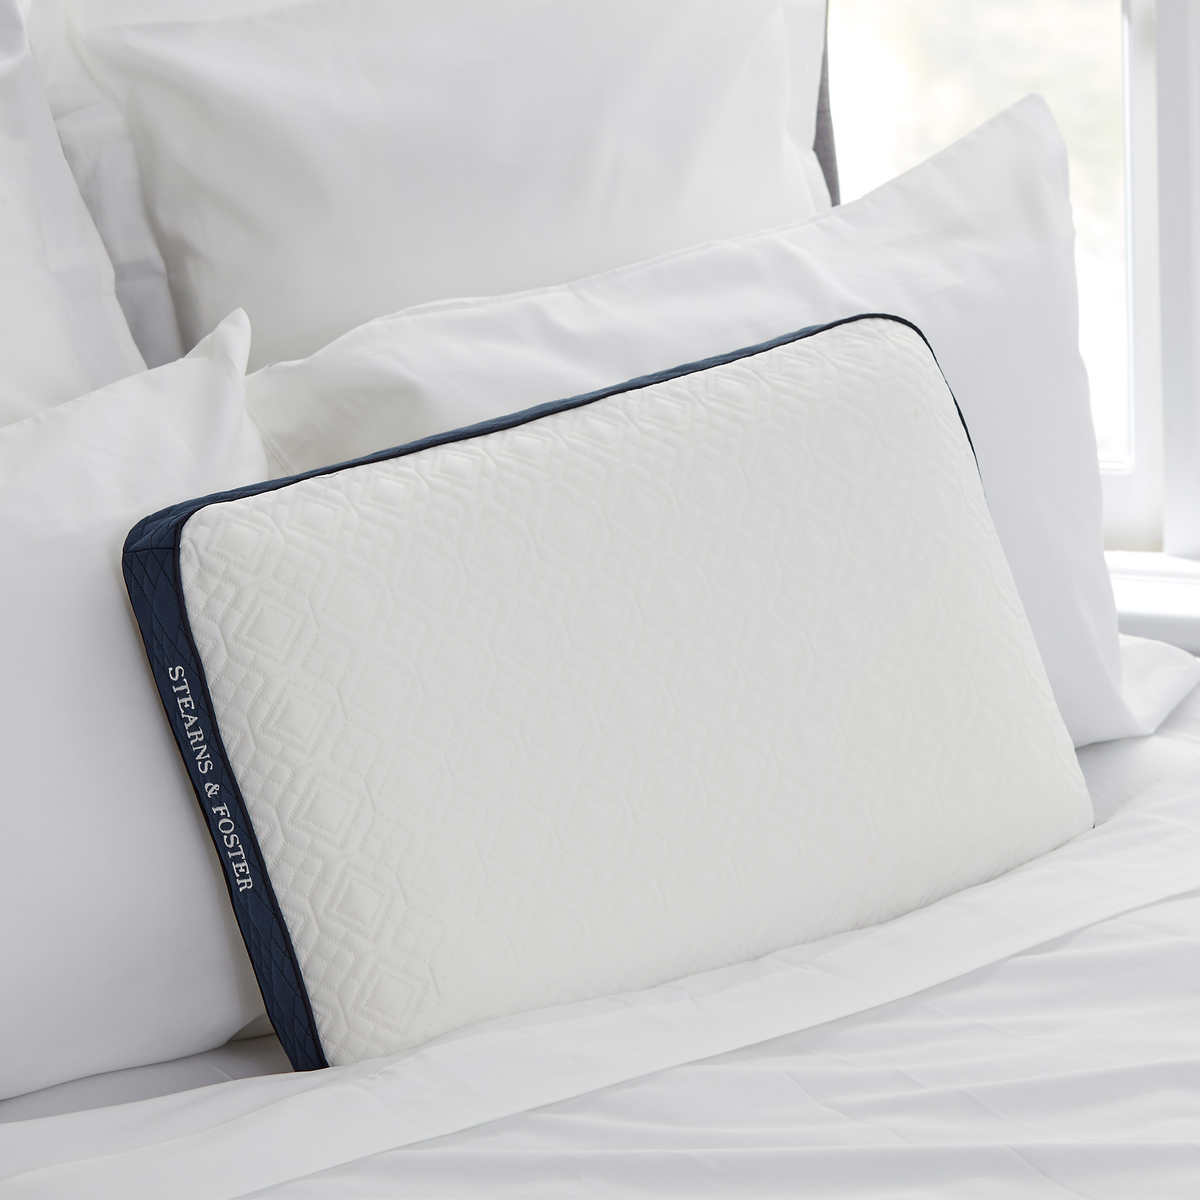 Stearns Foster Memory Foam Pillow With Cool Touch Cover